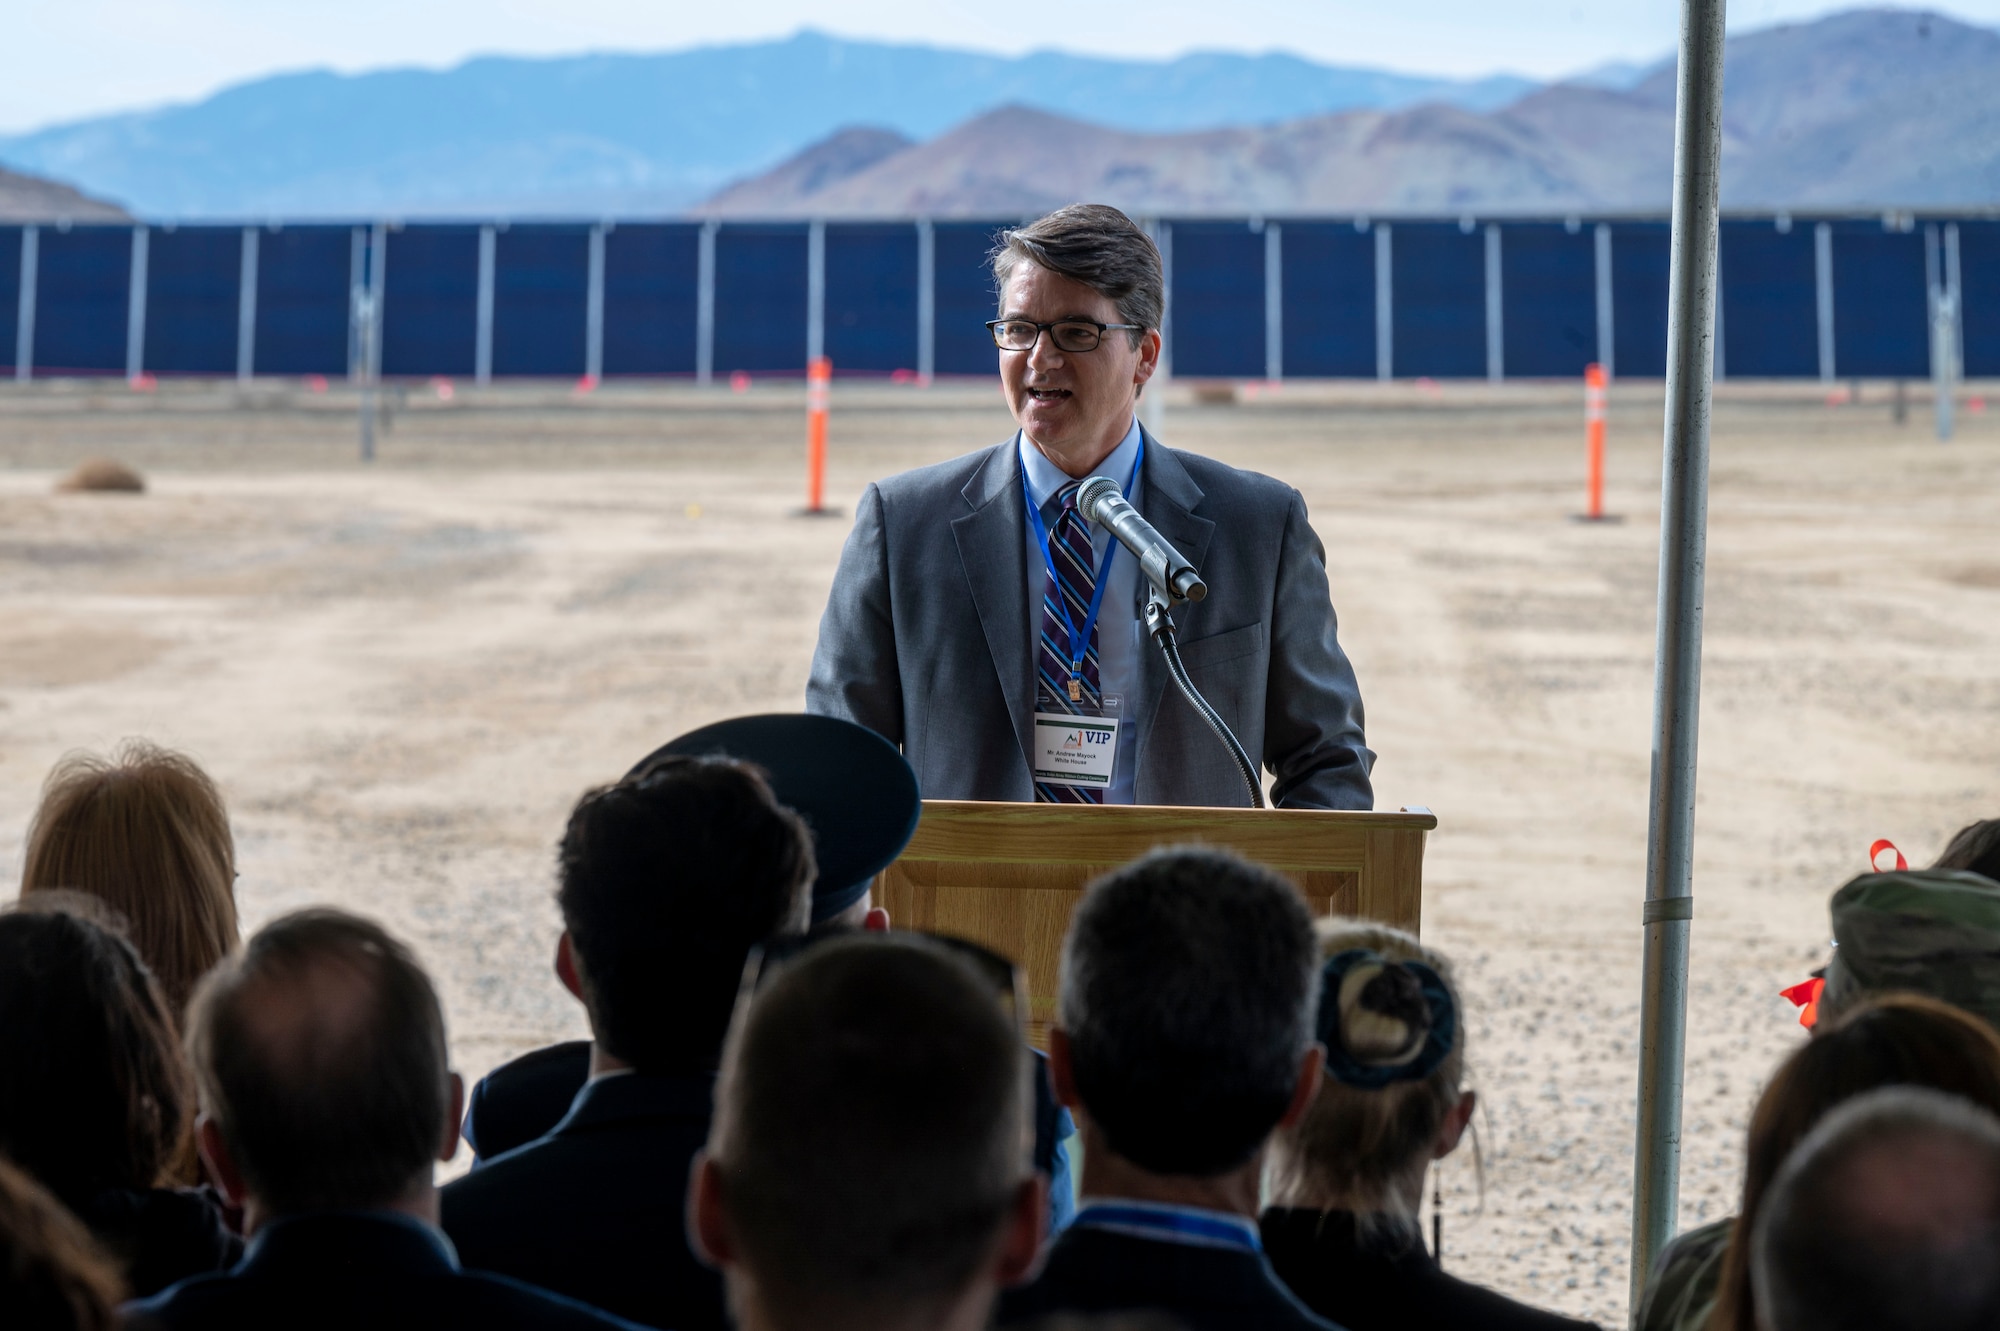 Andrew Mayock, Federal Chief Sustainability Officer, White House Council on Environmental Quality, speaks at the Edwards Solar Enhanced Use Lease Project ribbon cutting ceremony commemorating the largest private-public collaboration in Department of Defense history at Edwards Air Force Base, California, Feb. 2.